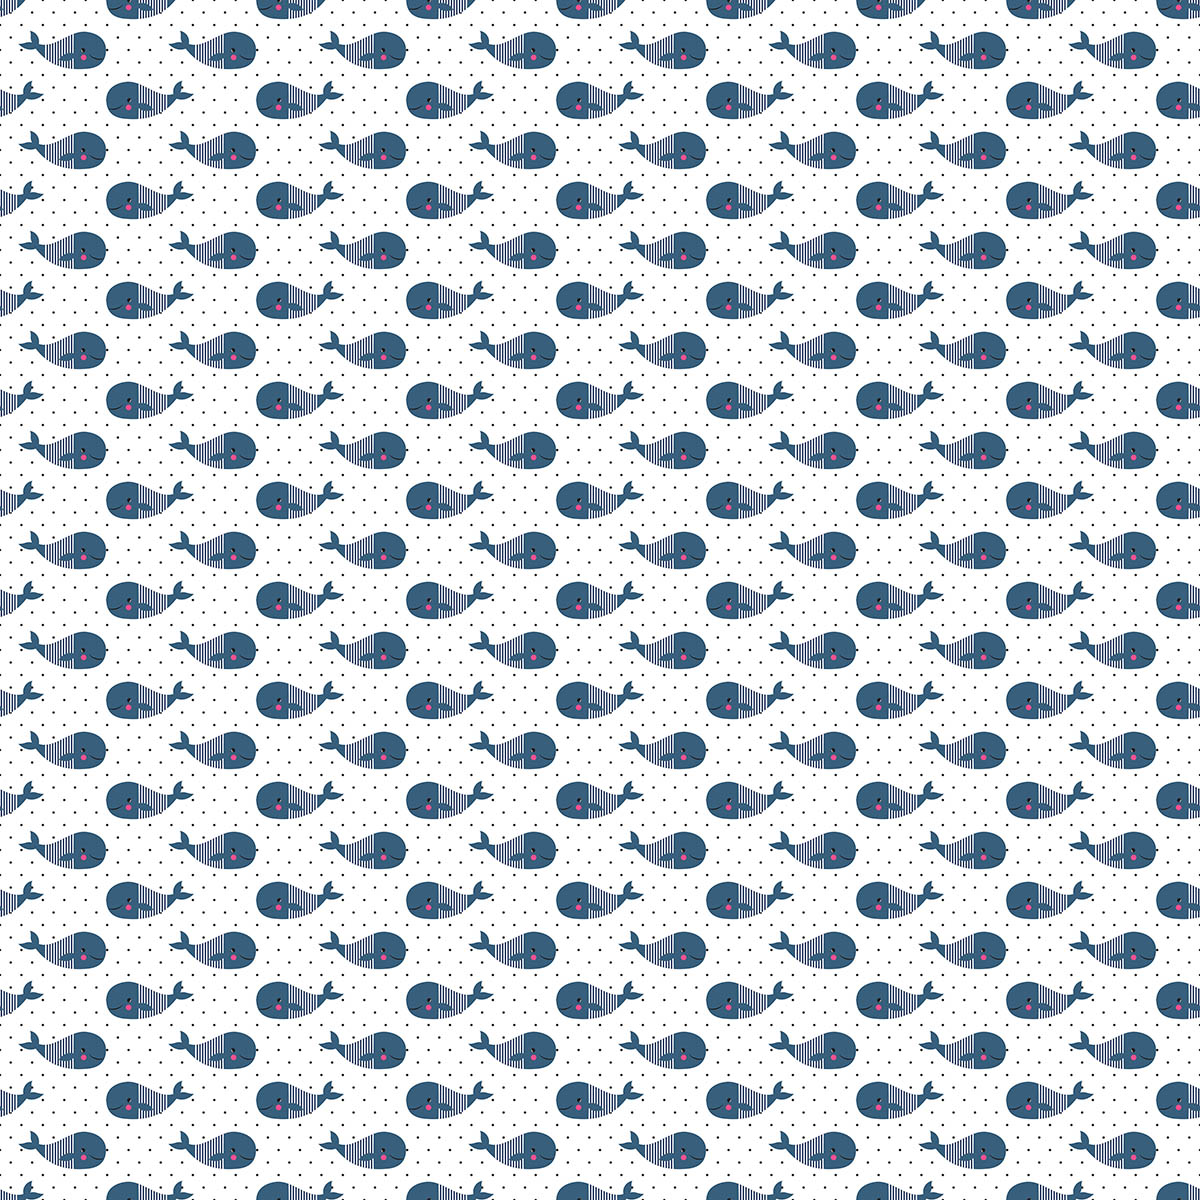 A pattern of blue whales